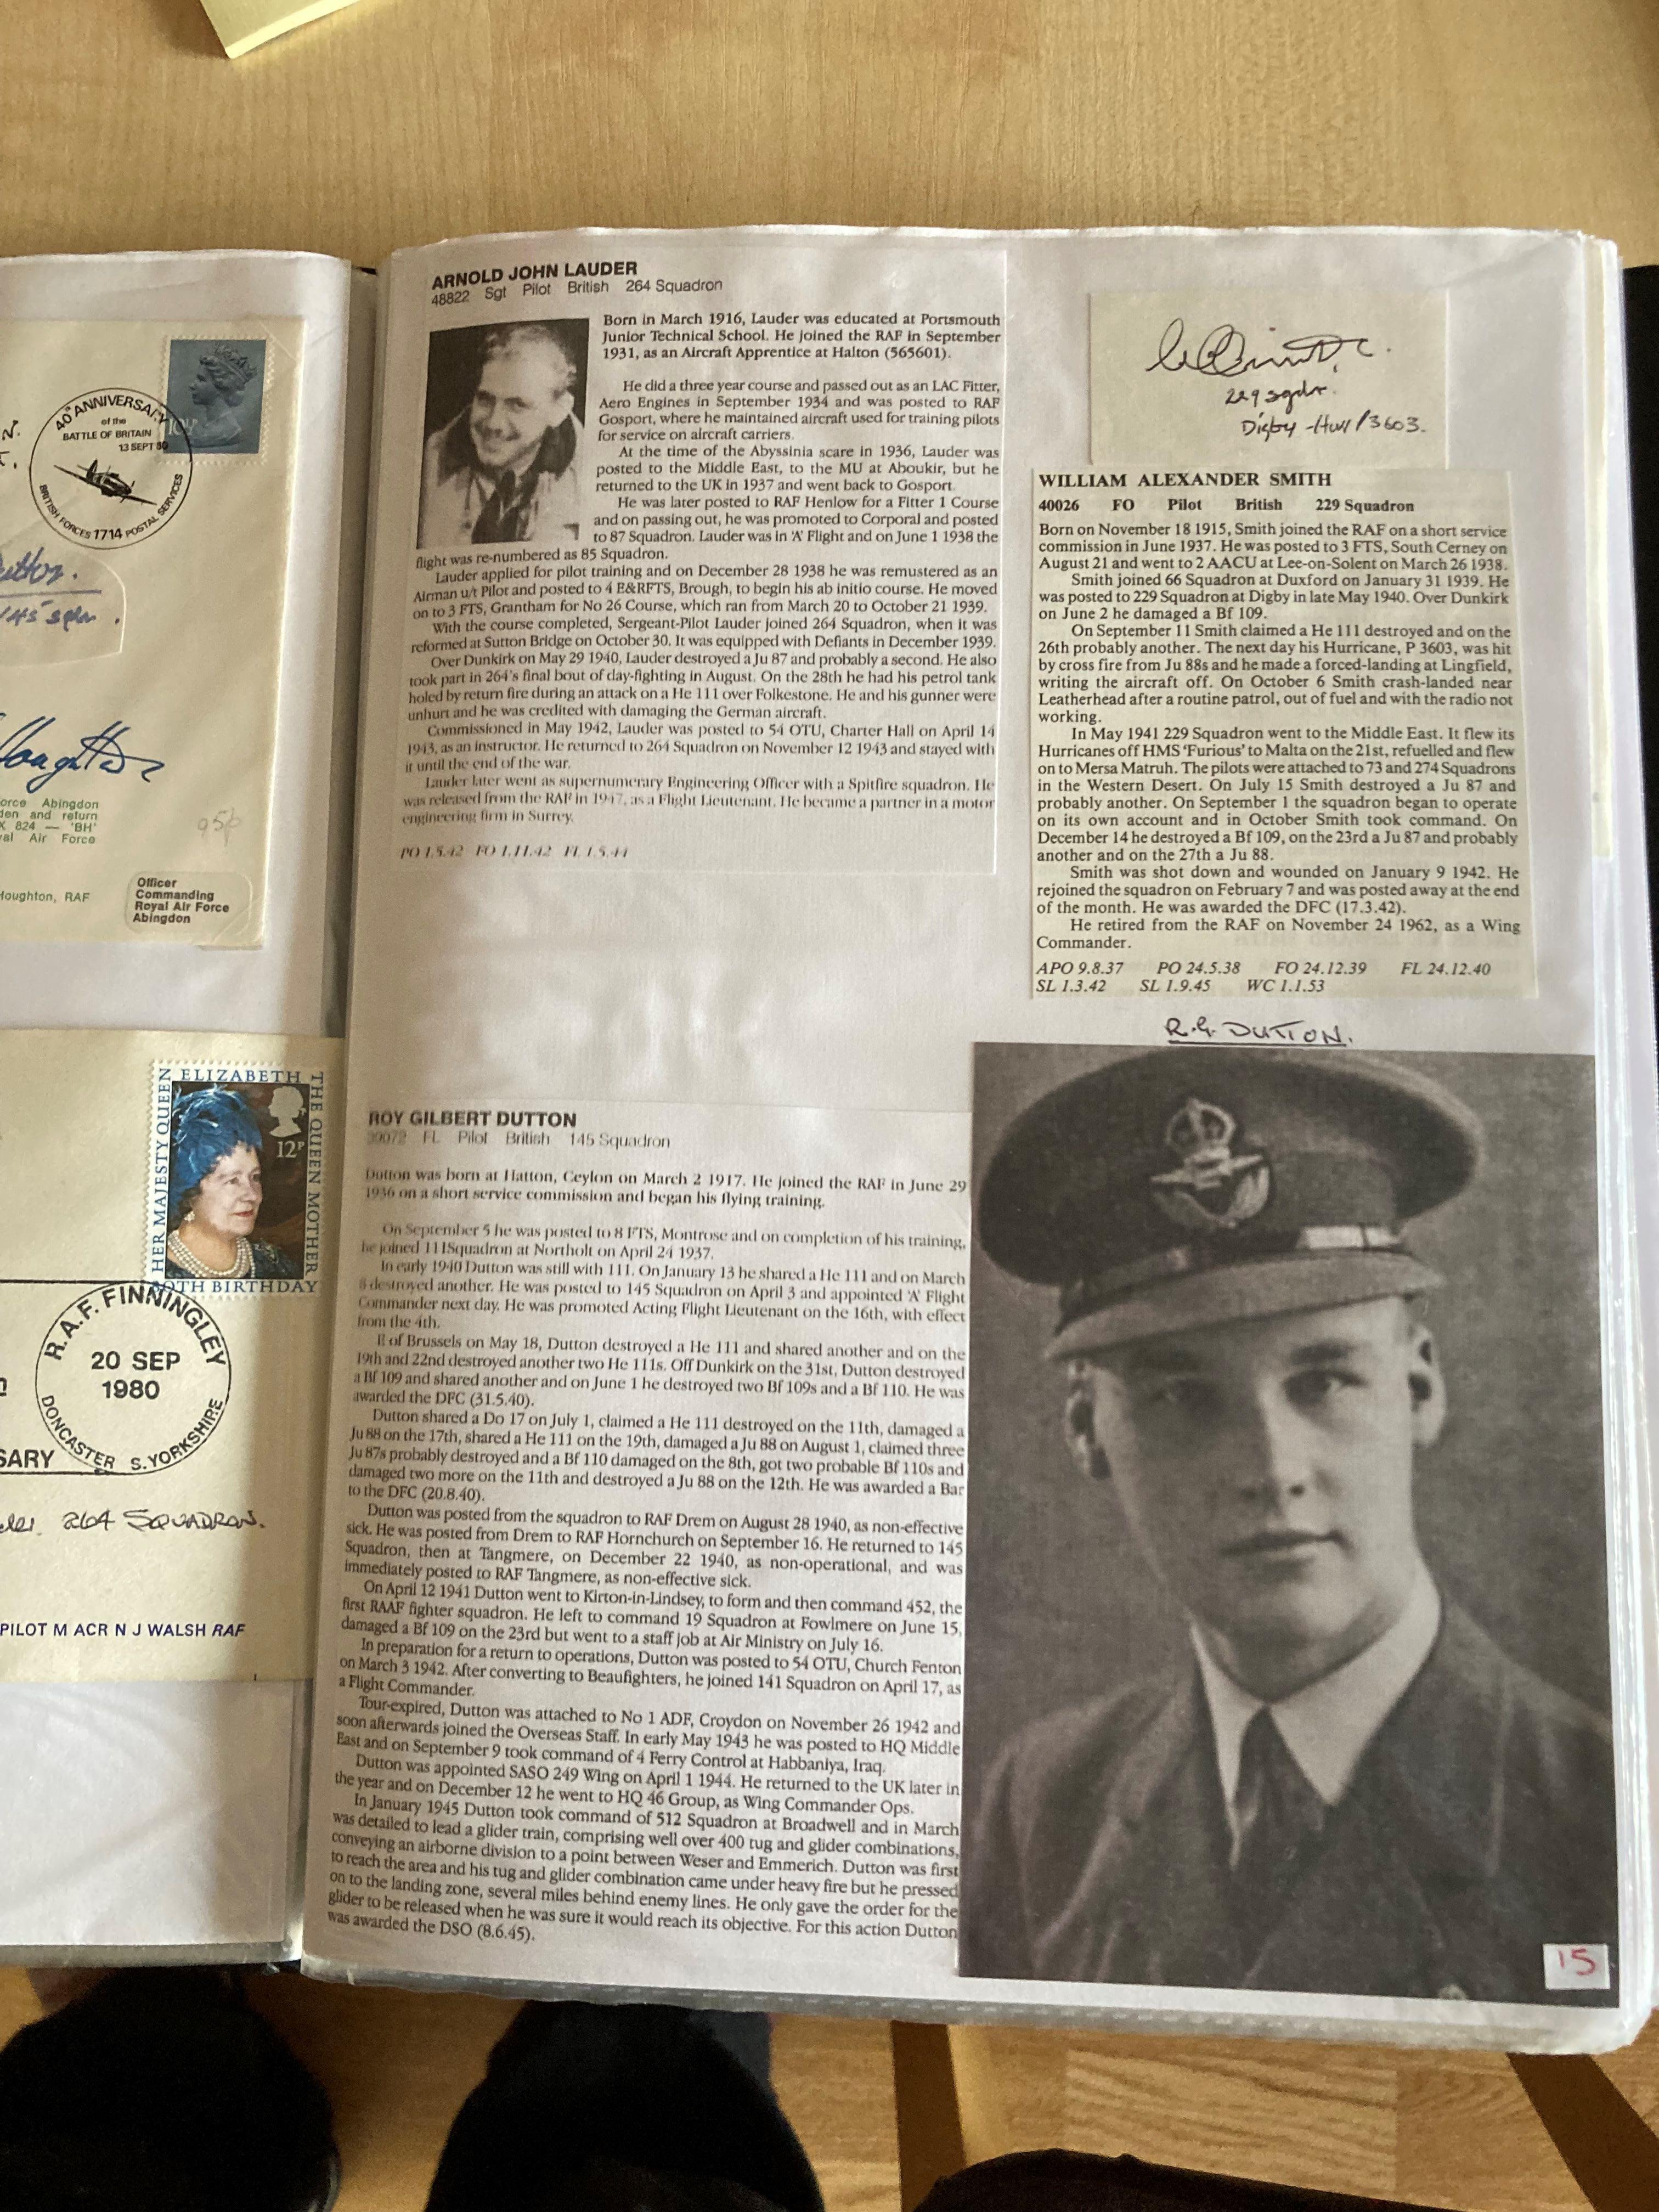 WW2 BOB fighter pilots Arnold Lauder 264 sqn, William Smith 229 sqn and Roy Dutton 145 sqn signed - Image 2 of 2